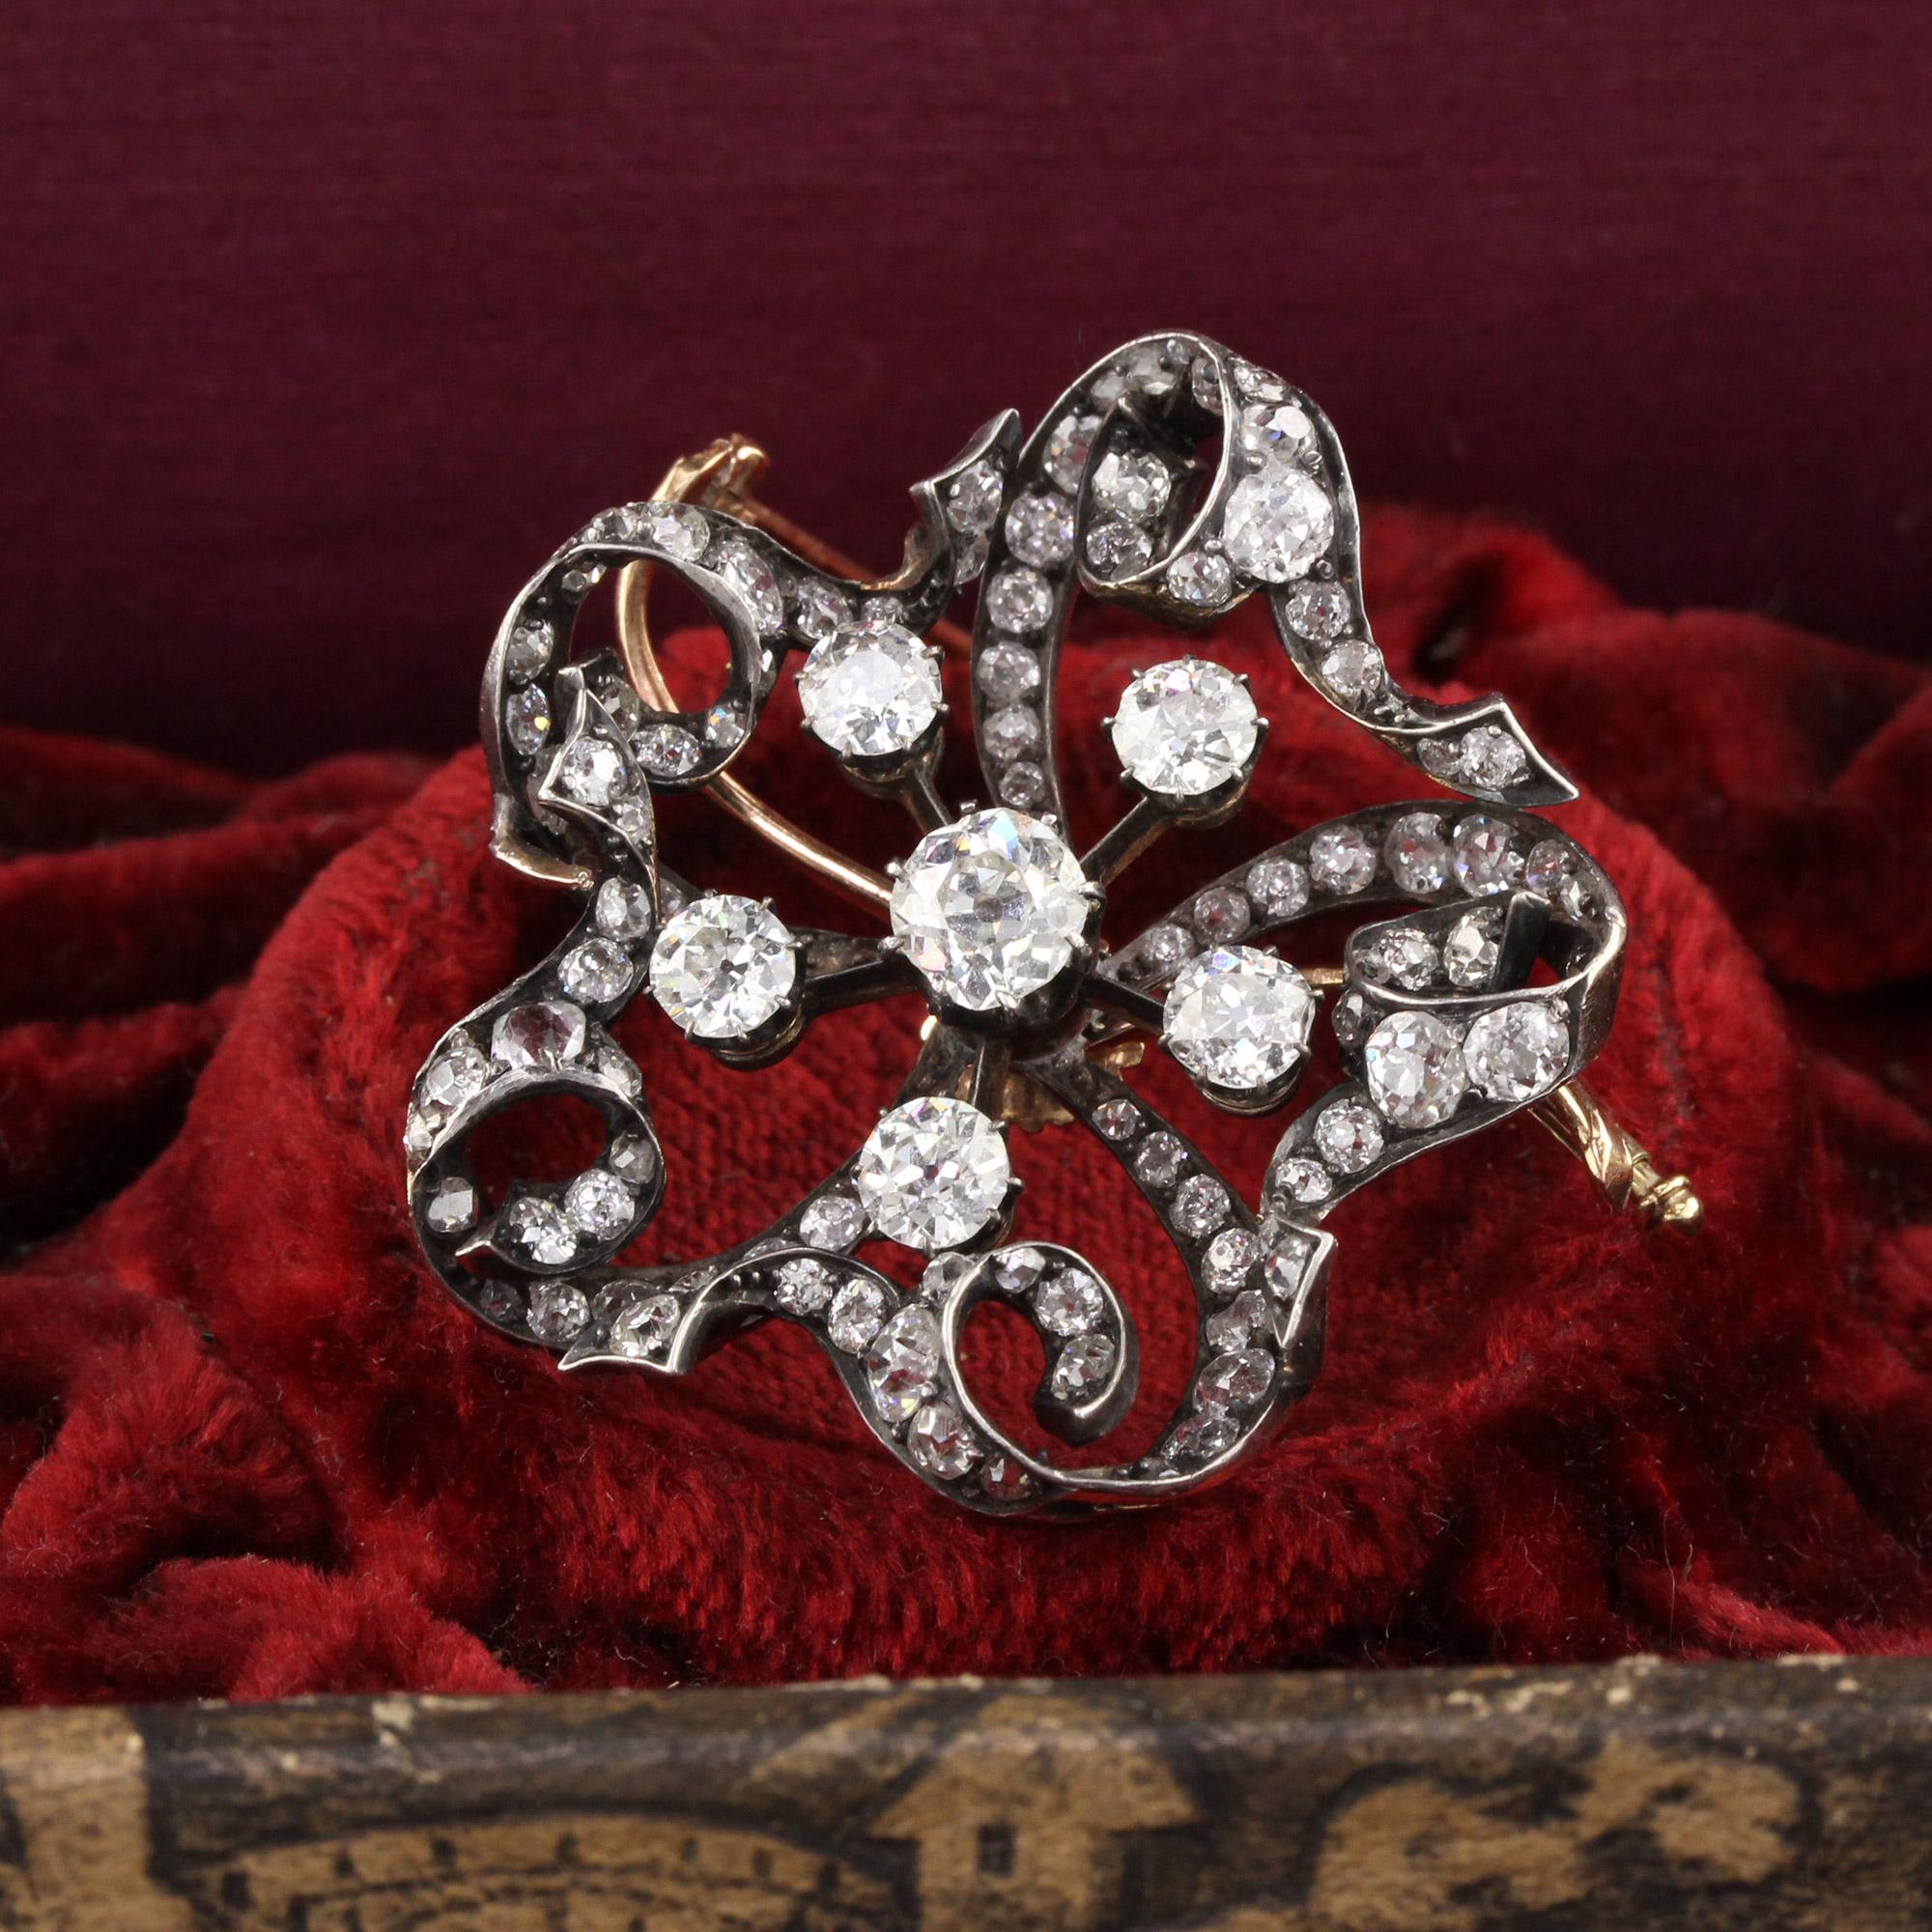 Amazing antique brooch with large white beautiful old cut diamonds

Metal: 18K Yellow Gold, Silver Top

Weight: 14.3 Grams

Diamond Weight: Approximately 6 carats old mine cut diamonds 

Diamond Color: H - I

Diamond Clarity: SI1

Measurements: 36 x